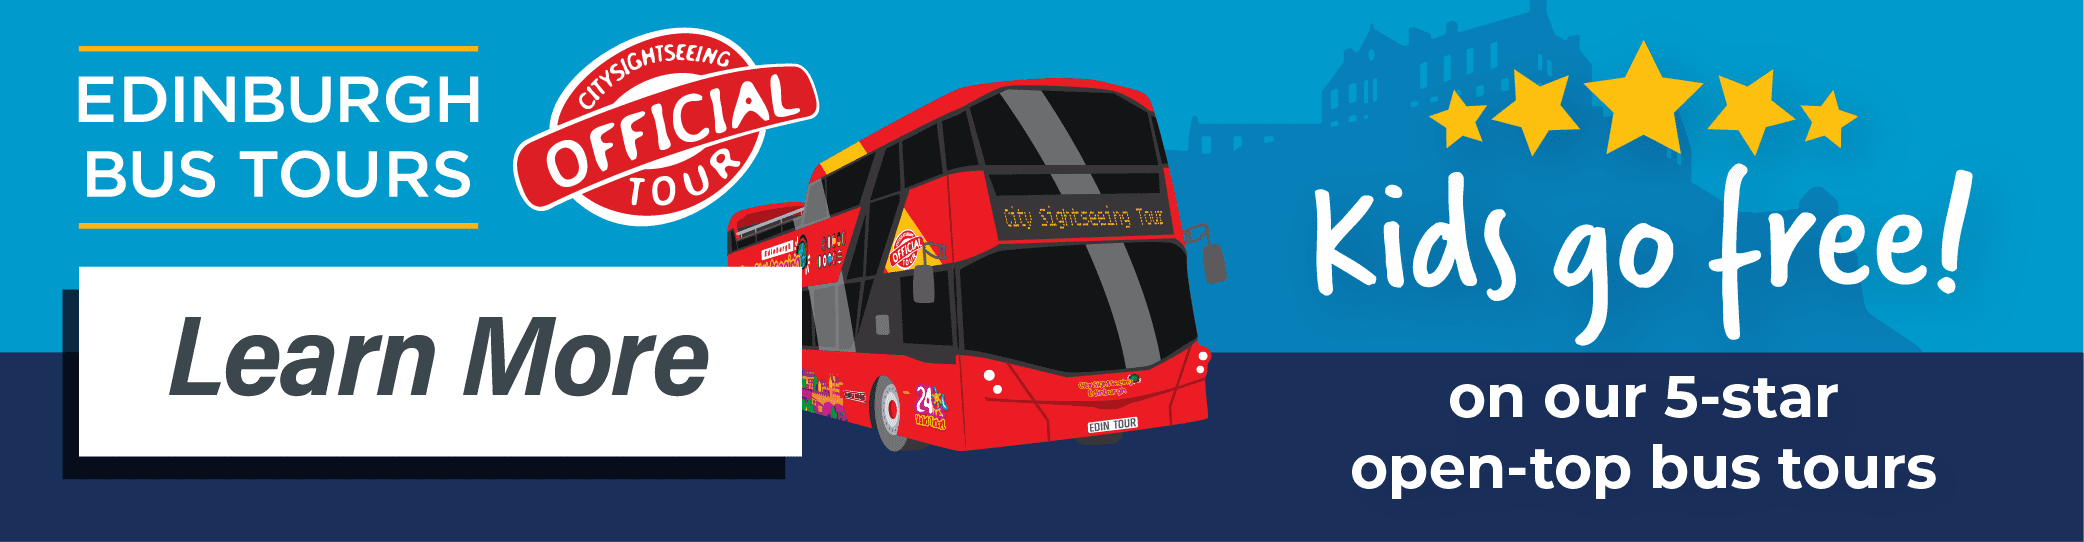 Kids go free on our 5-star open-top bus tours. Buy your tickets at edinburghtour.com or visit our Tour Hub at Waterloo Place. Learn more.